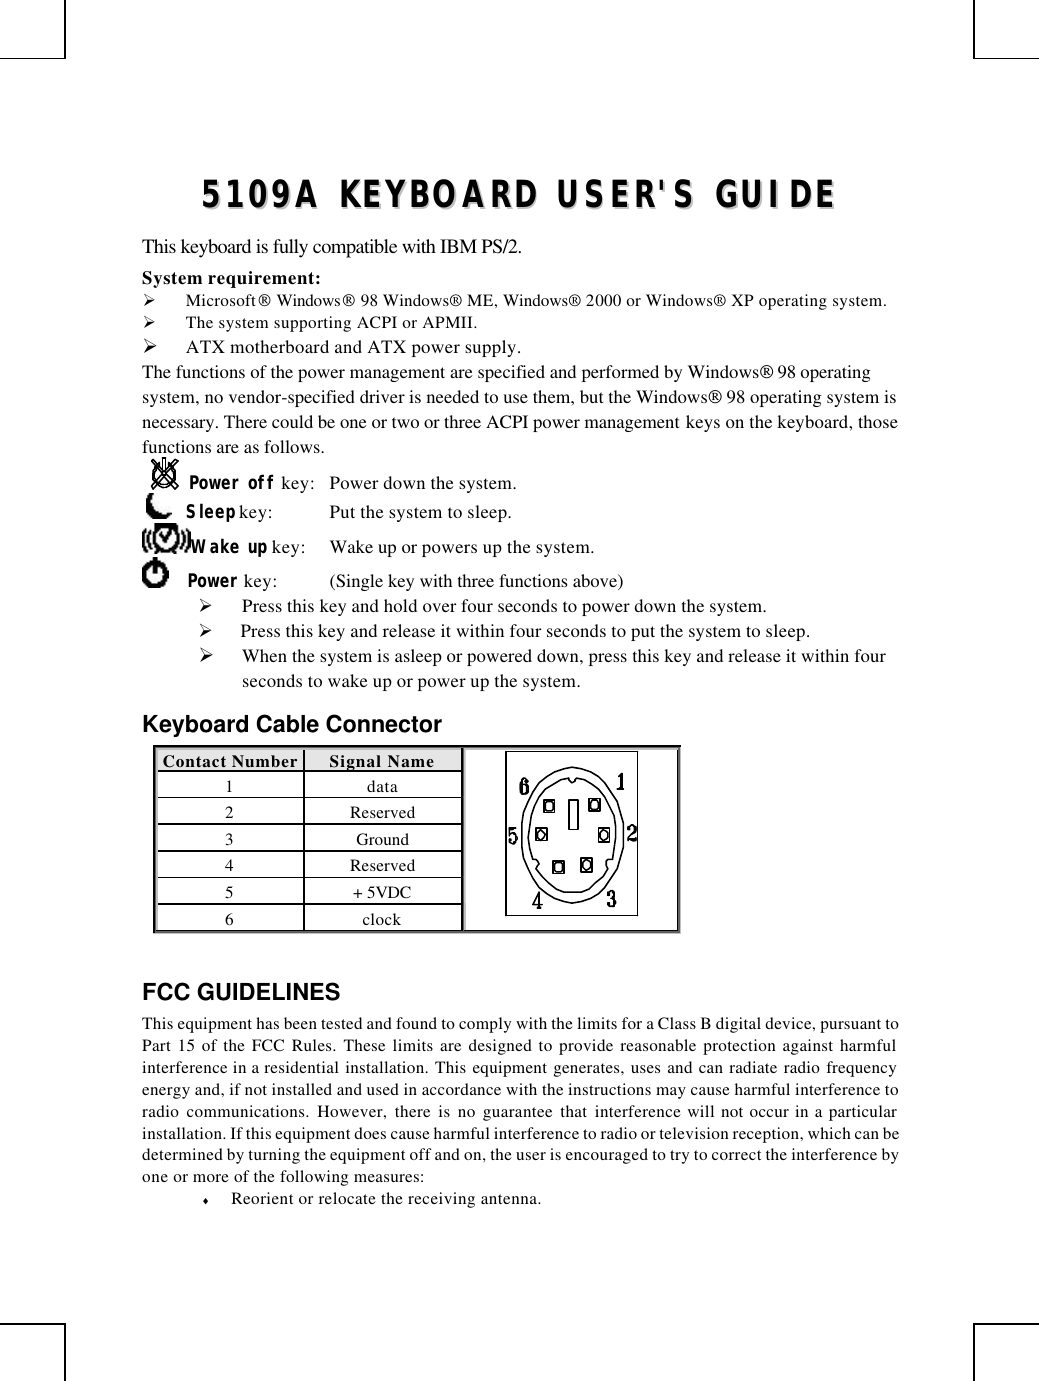         55110099AA  KKEEYYBBOOAARRDD  UUSSEERR&apos;&apos;SS  GGUUIIDDEE  This keyboard is fully compatible with IBM PS/2. System requirement:  Ø Microsoft Windows 98 Windows® ME, Windows® 2000 or Windows® XP operating system. Ø The system supporting ACPI or APMII. Ø ATX motherboard and ATX power supply. The functions of the power management are specified and performed by Windows 98 operating system, no vendor-specified driver is needed to use them, but the Windows 98 operating system is necessary. There could be one or two or three ACPI power management keys on the keyboard, those functions are as follows. Power off key: Power down the system.      Sleep key: Put the system to sleep.  Wake up key: Wake up or powers up the system.      Power key: (Single key with three functions above)      Ø Press this key and hold over four seconds to power down the system. Ø  Press this key and release it within four seconds to put the system to sleep. Ø When the system is asleep or powered down, press this key and release it within four seconds to wake up or power up the system. Keyboard Cable Connector Contact Number Signal Name  1 data 2 Reserved 3 Ground 4 Reserved 5 + 5VDC 6 clock  FCC GUIDELINES This equipment has been tested and found to comply with the limits for a Class B digital device, pursuant to Part 15 of the FCC Rules. These limits are designed to provide reasonable protection against harmful interference in a residential installation. This equipment generates, uses and can radiate radio frequency energy and, if not installed and used in accordance with the instructions may cause harmful interference to radio communications. However, there is no guarantee that interference will not occur in a particular installation. If this equipment does cause harmful interference to radio or television reception, which can be determined by turning the equipment off and on, the user is encouraged to try to correct the interference by one or more of the following measures: ♦ Reorient or relocate the receiving antenna. 